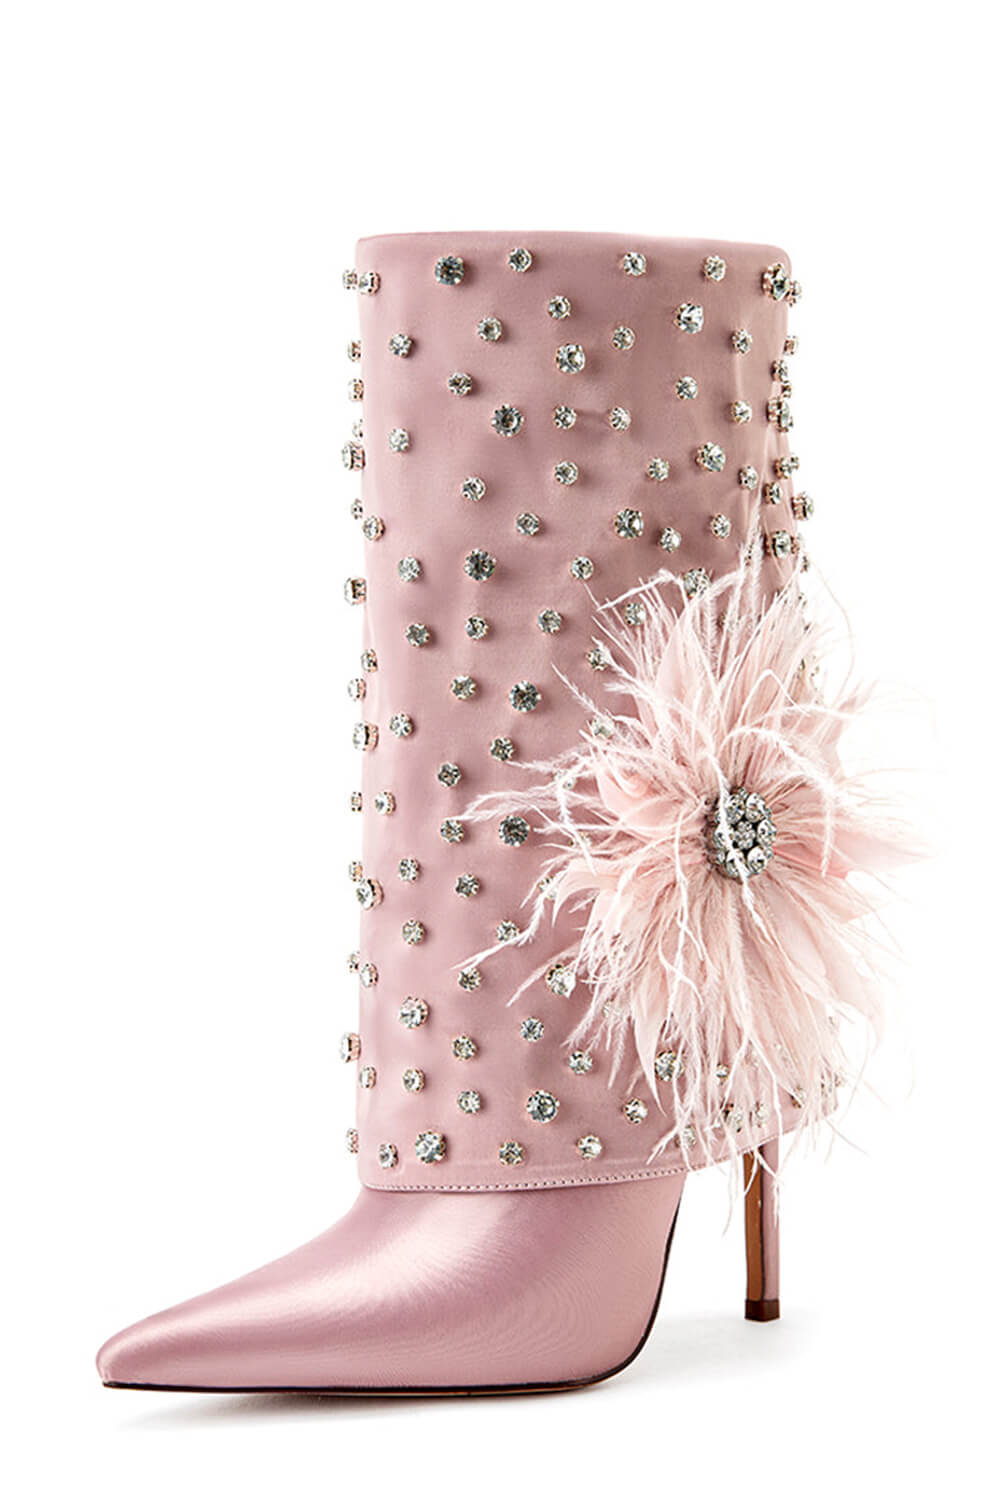 Rhinestone Embellished Satin Fold Over Pointed Toe Knee High Stiletto Boots With Feathered Flower Detail - Pink